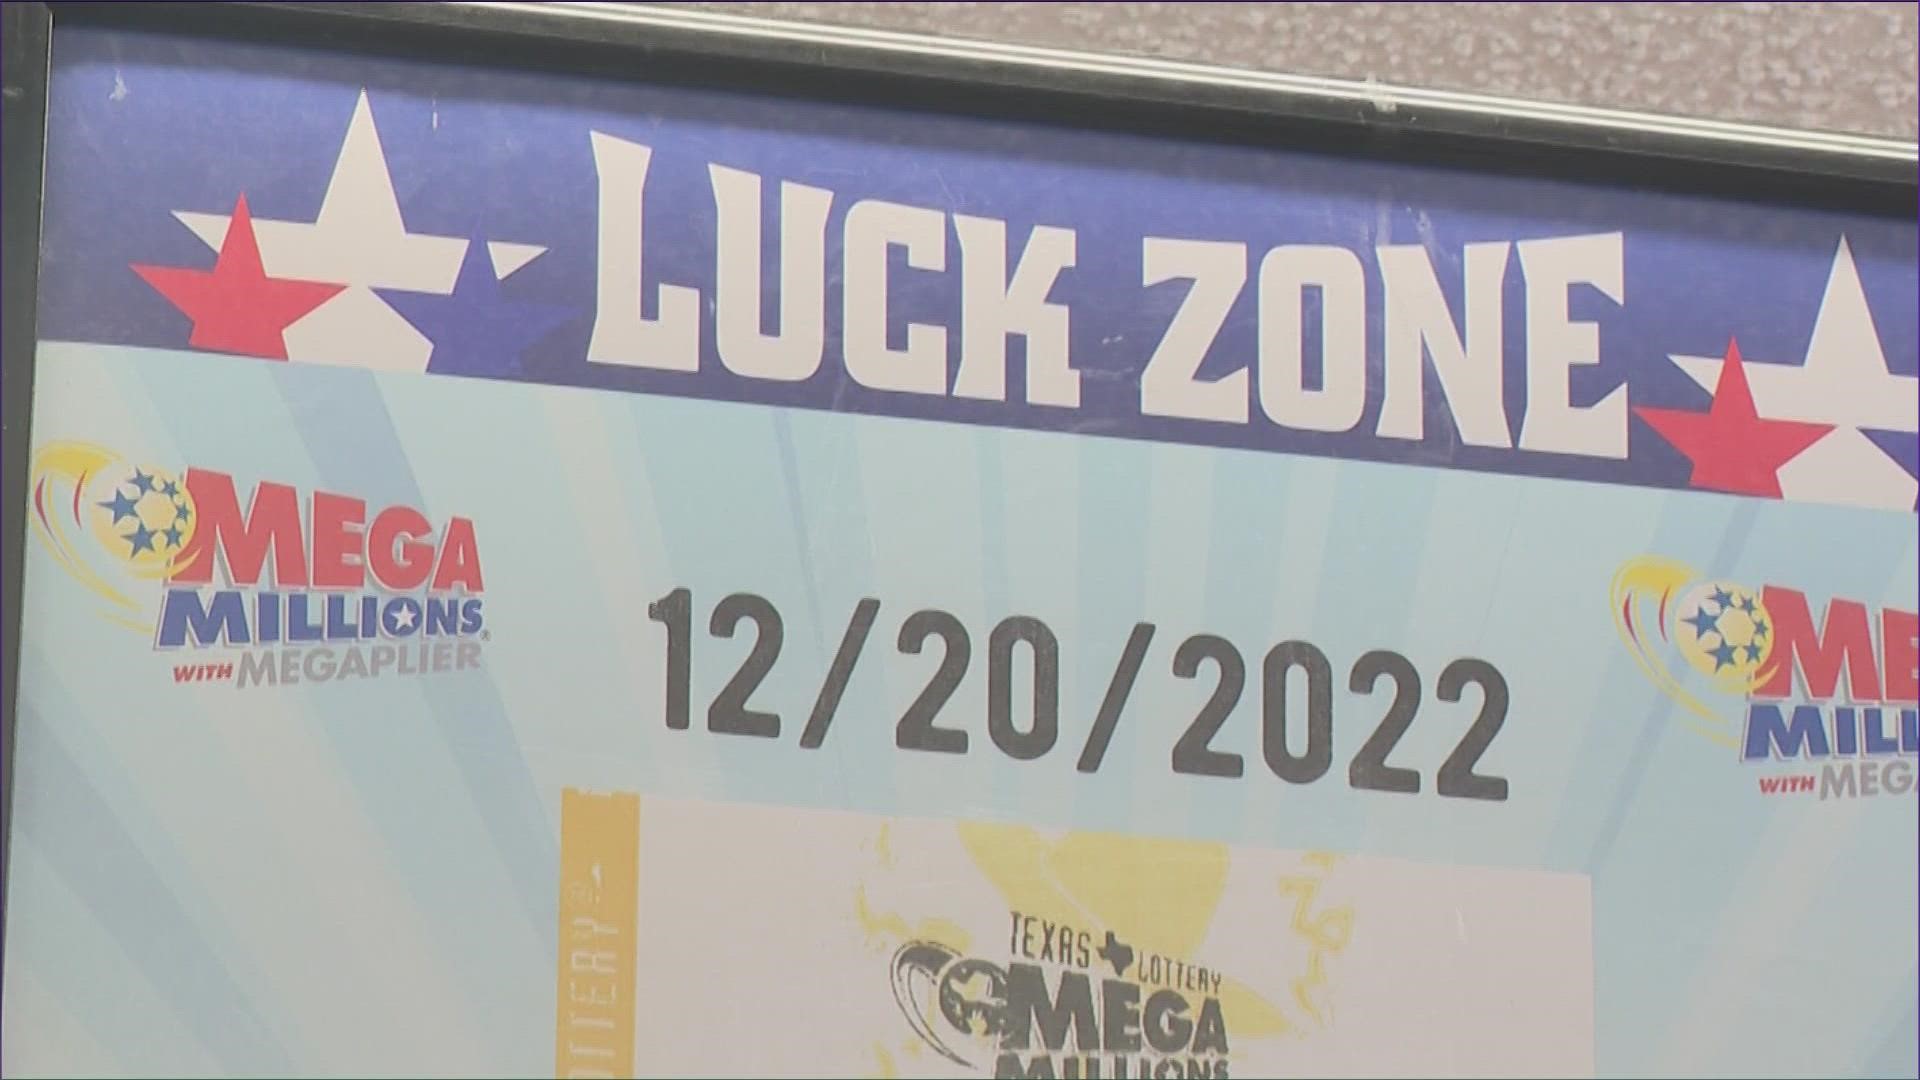 Lottery luck has struck twice in two months at this Round Rock store.